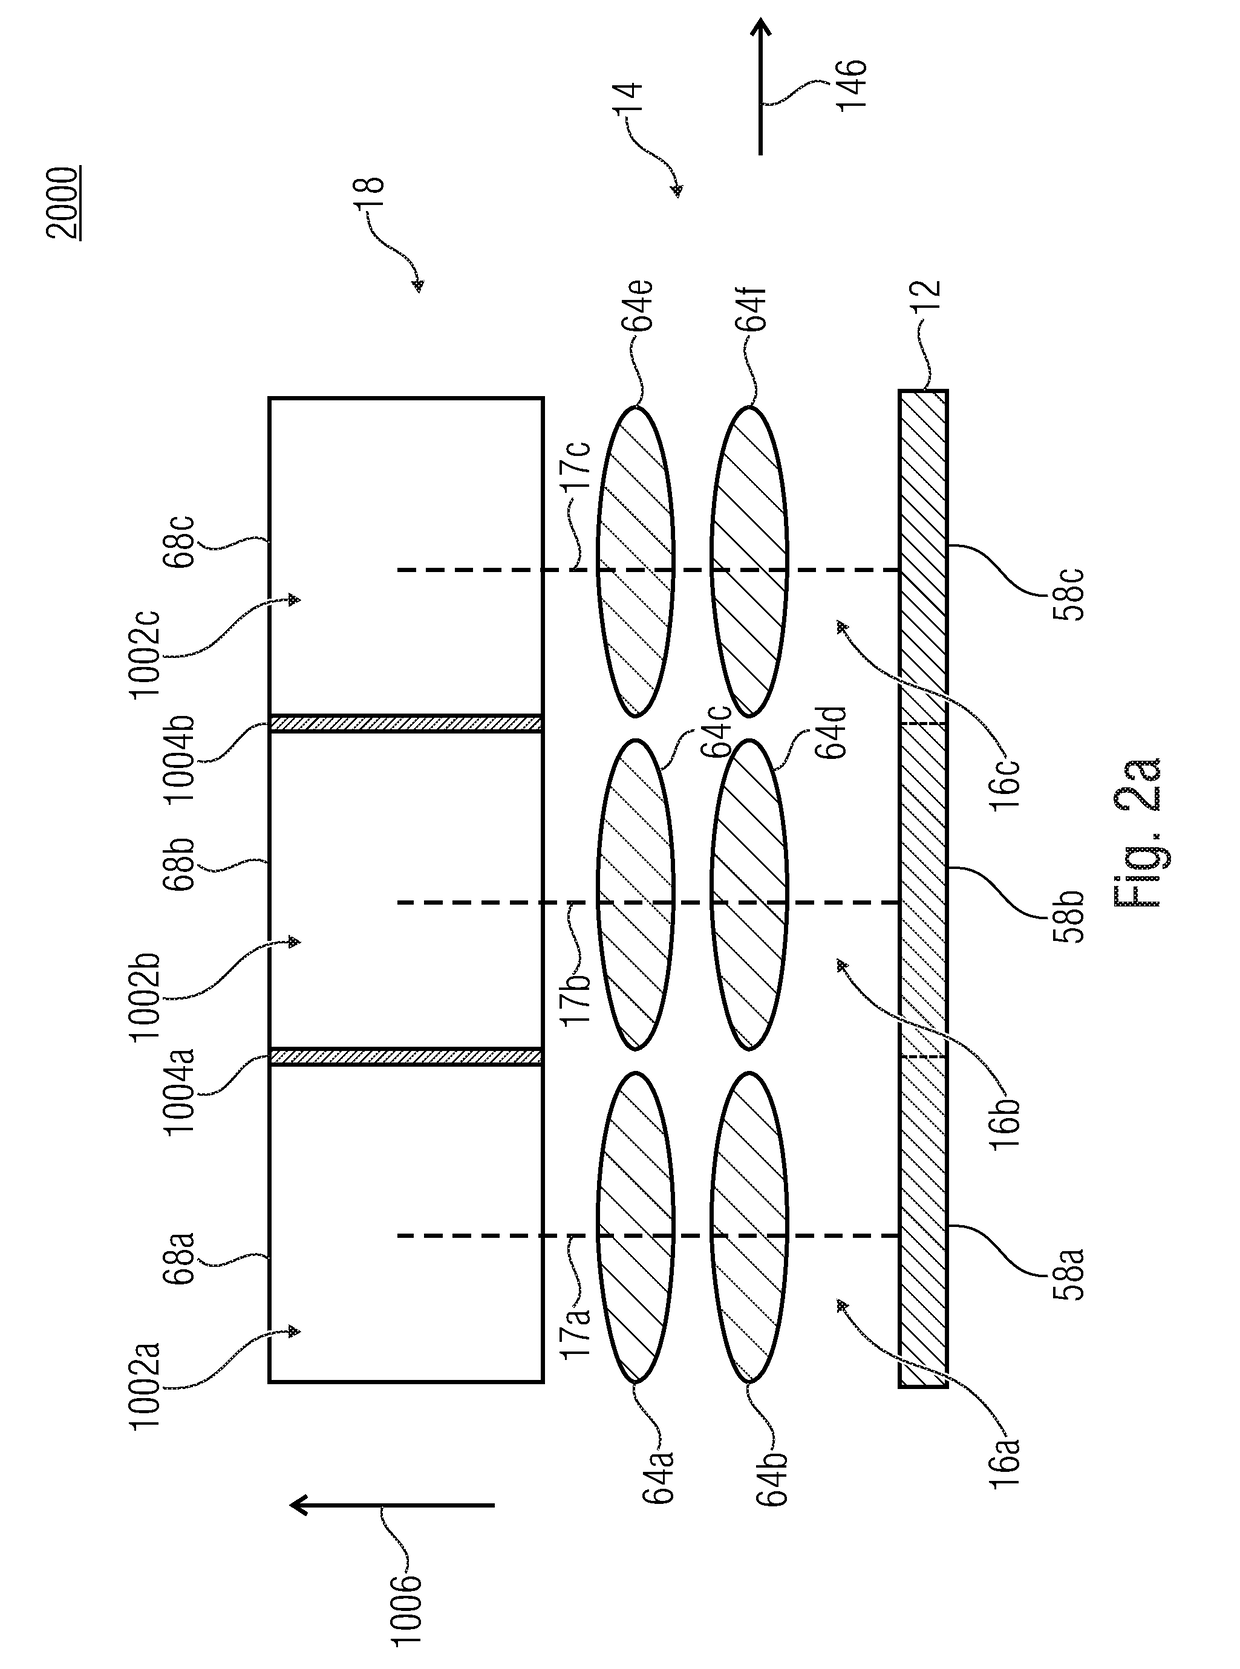 Multi-aperture imaging device, imaging system and method for capturing an object area